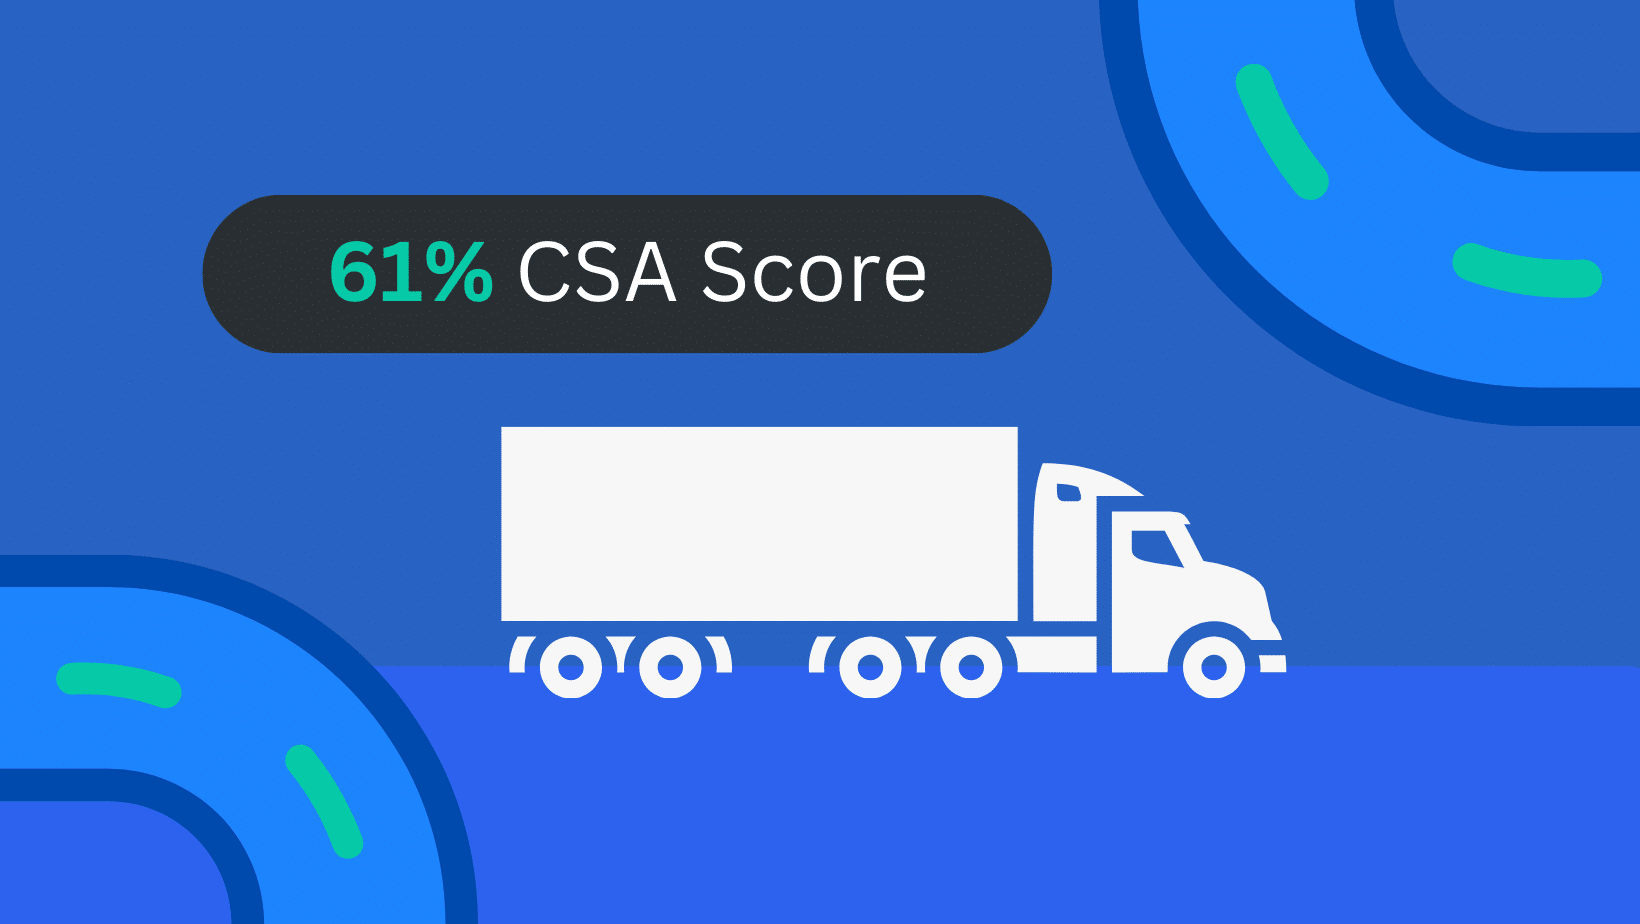 Hacks to Improve Your CSA Score - MVR Online